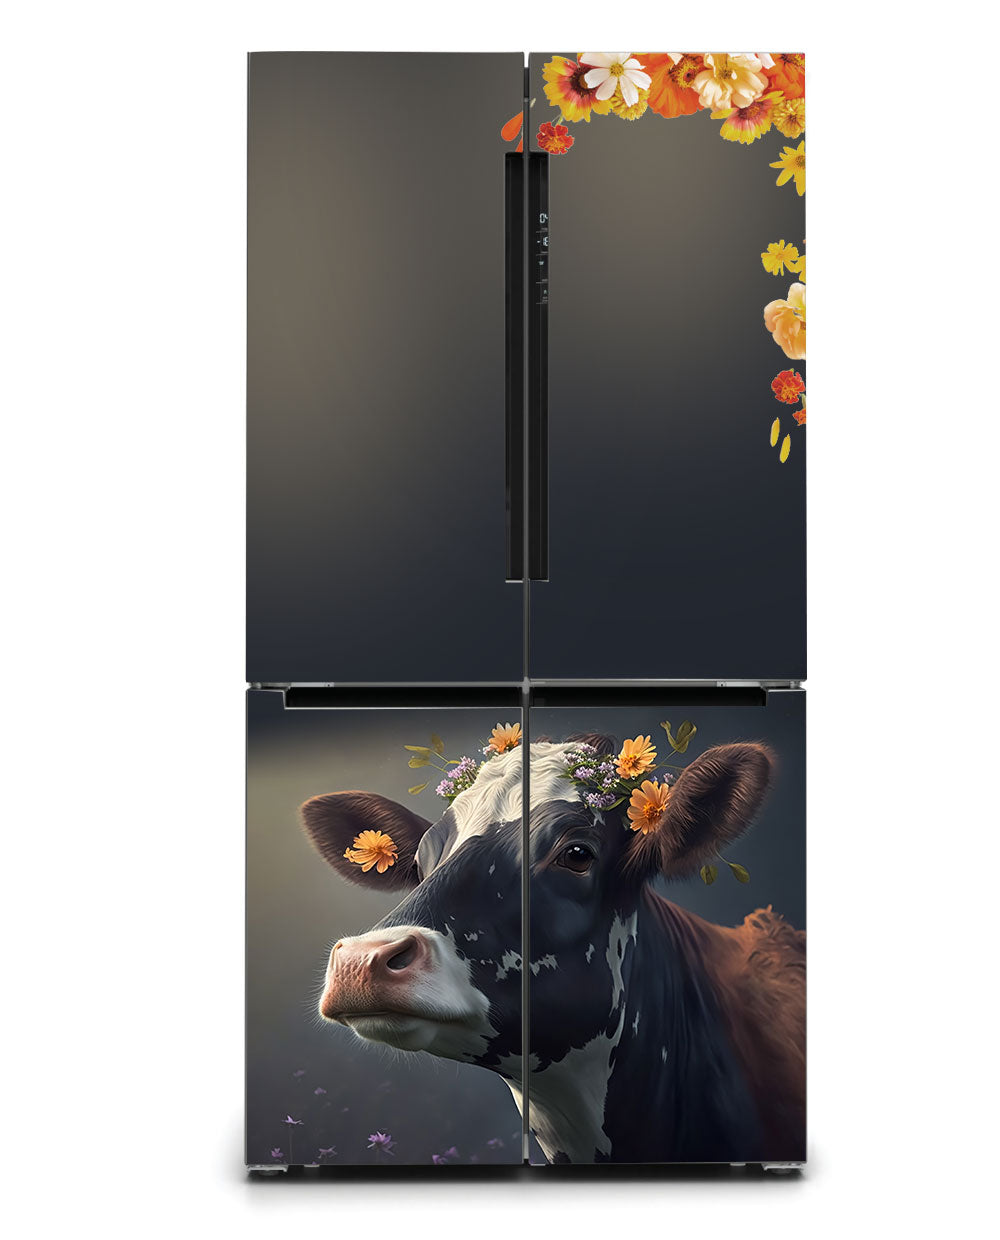 Cow with daisies